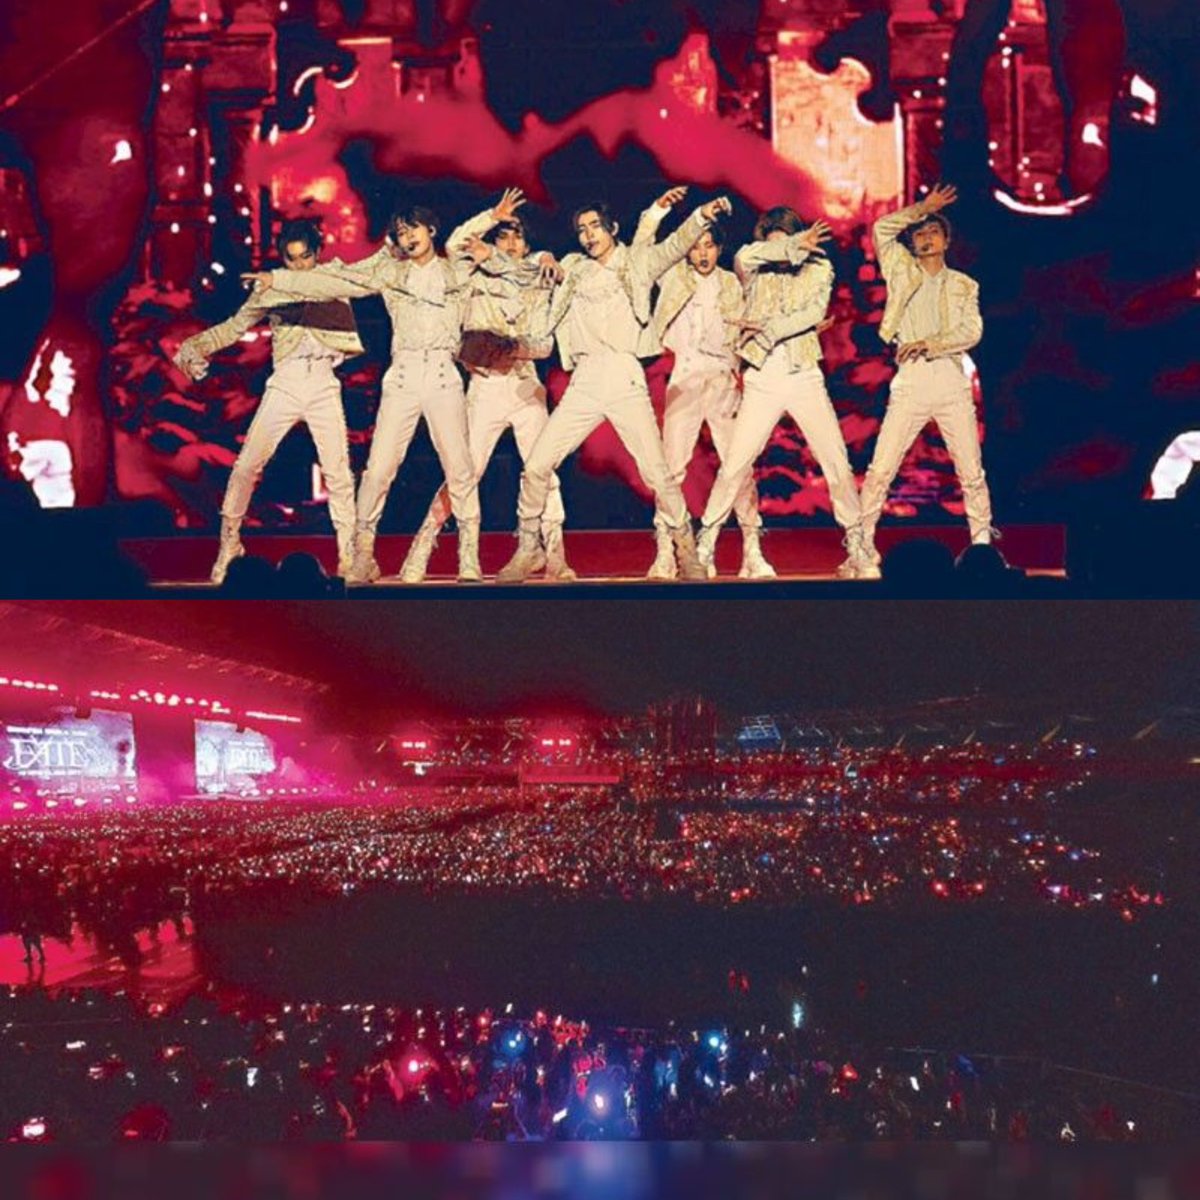 [FULL ARTICLE] From The Philippine Star Published: March 14, 2024 - 1:00 AM KST ‘ENHYPEN's fate ends on a high note’ On February 3, the K-pop sensation ENHYPEN brought their second global tour, “Fate,” to a spectacular close at the New Clark City Stadium in the Philippines.